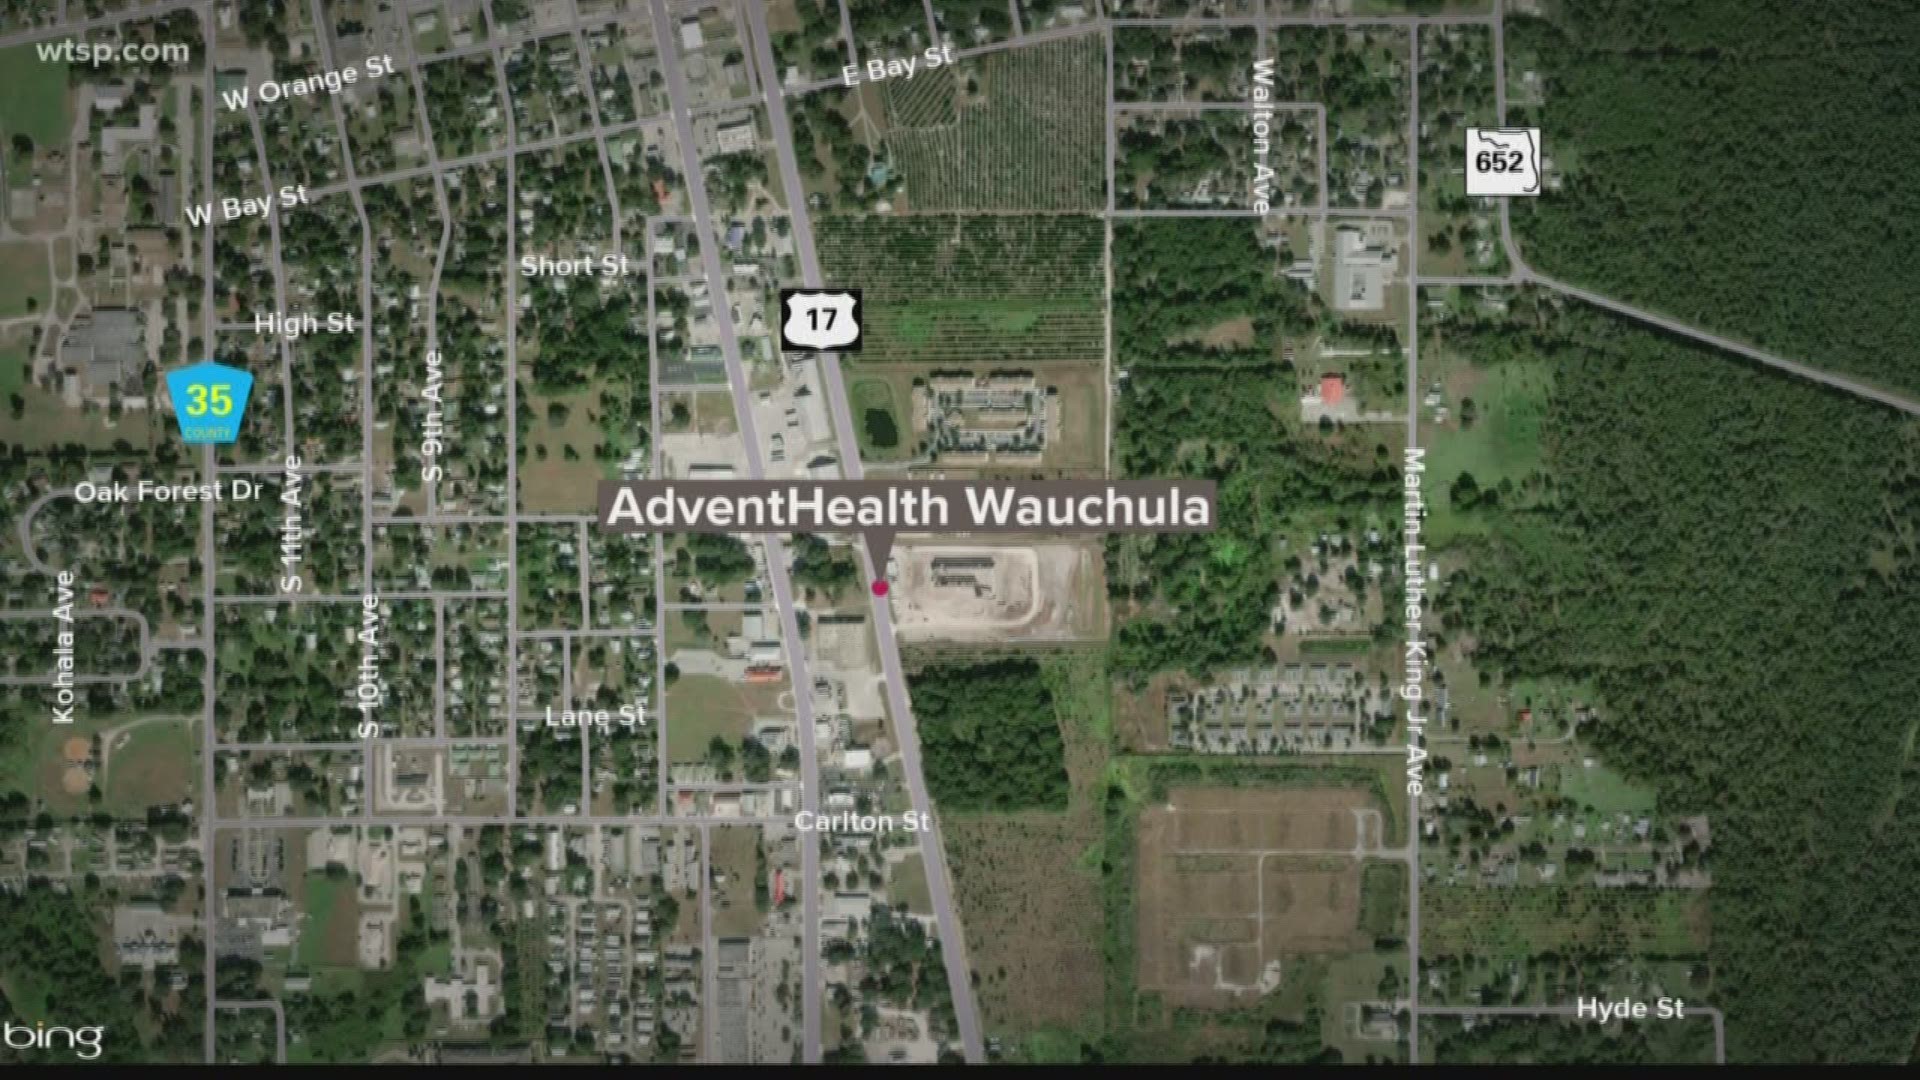 Hardee County deputies said they are investigating a bomb threat at AdventHealth Wauchula and at a radio station south of Zolfo.